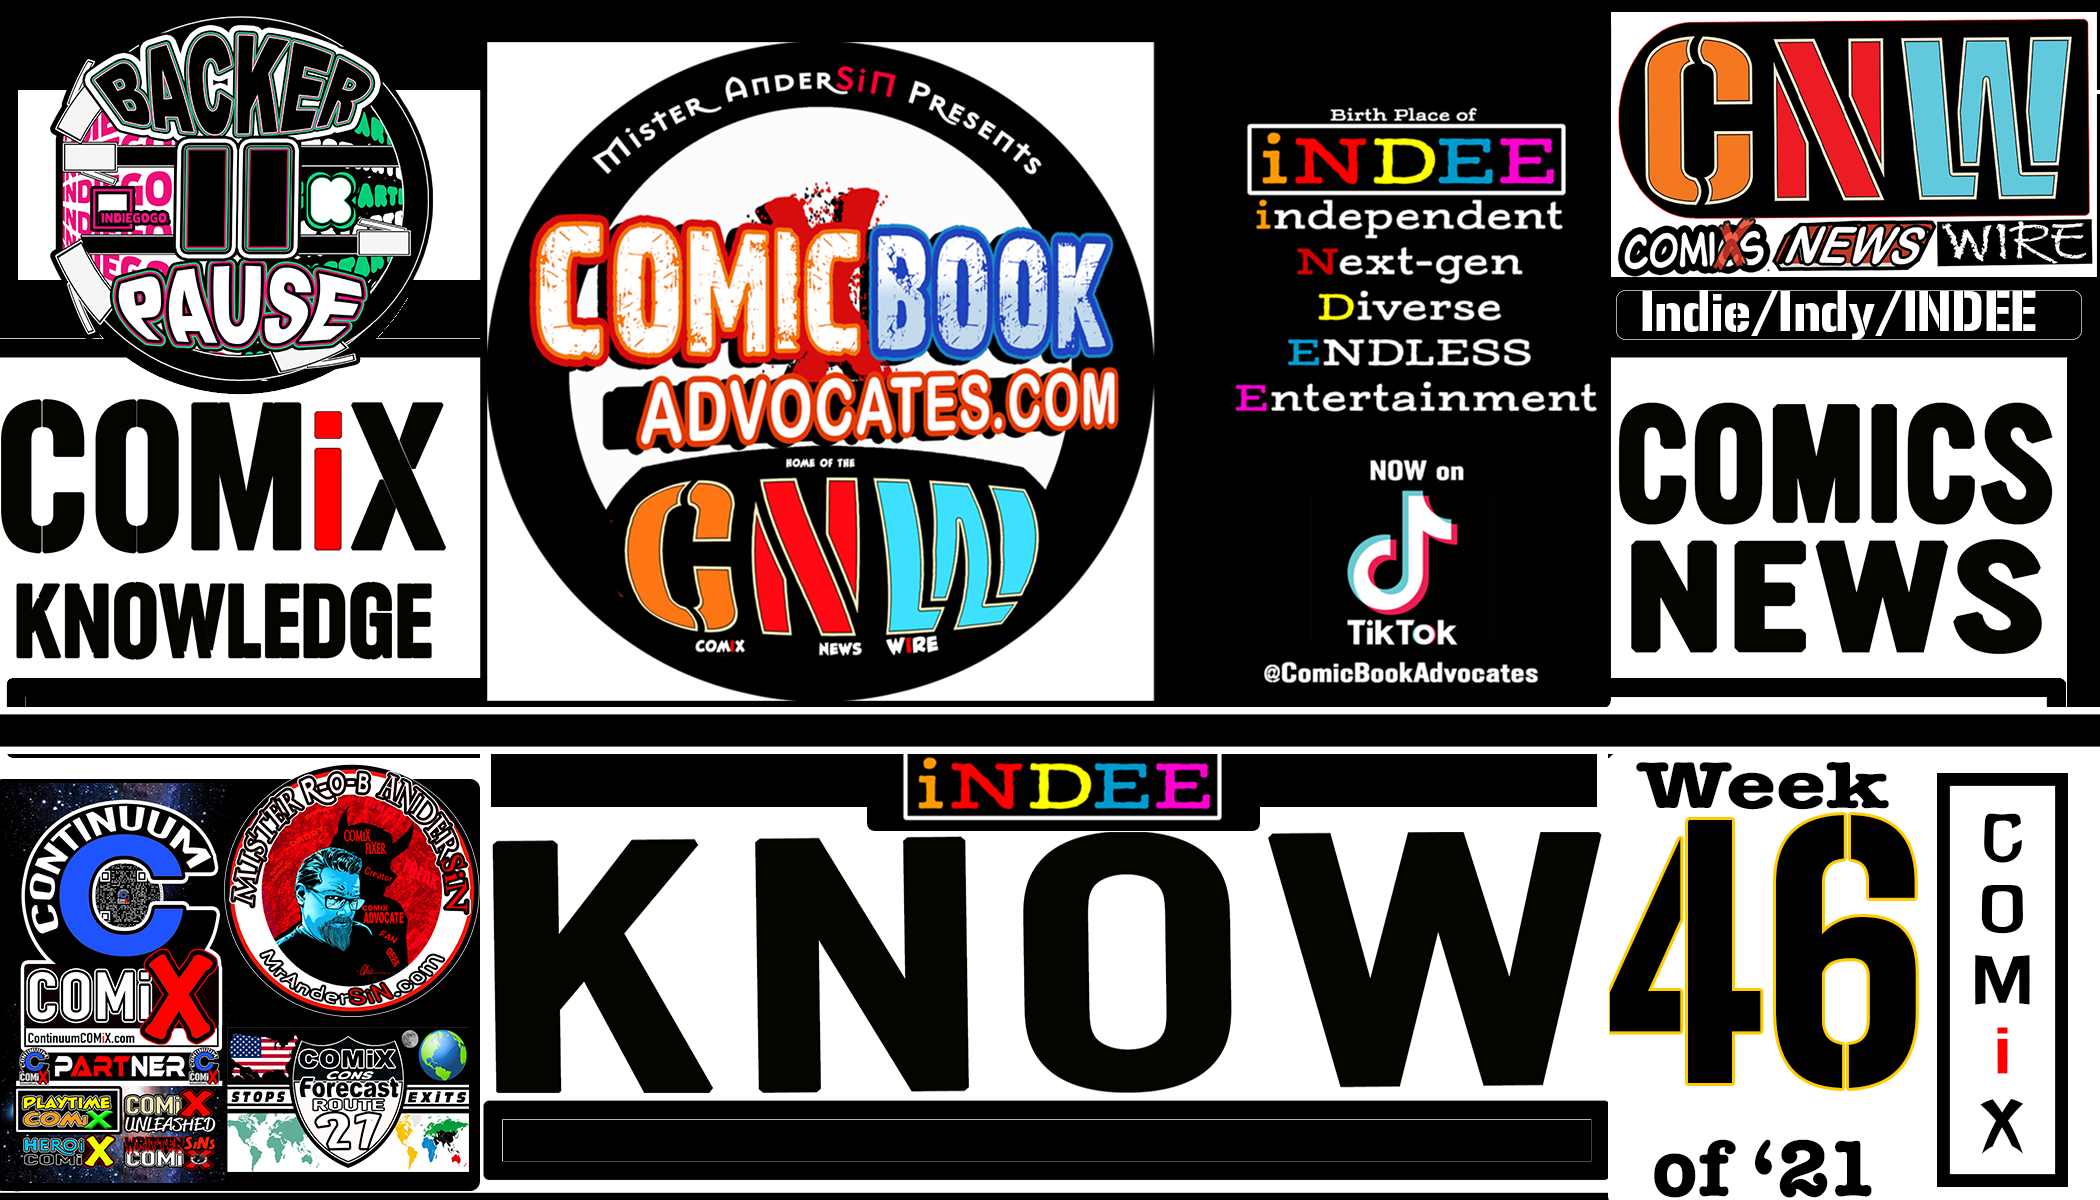 Week 46 of ’21-This Week in INDEE part of  THE COMiX NEWS WiRE.